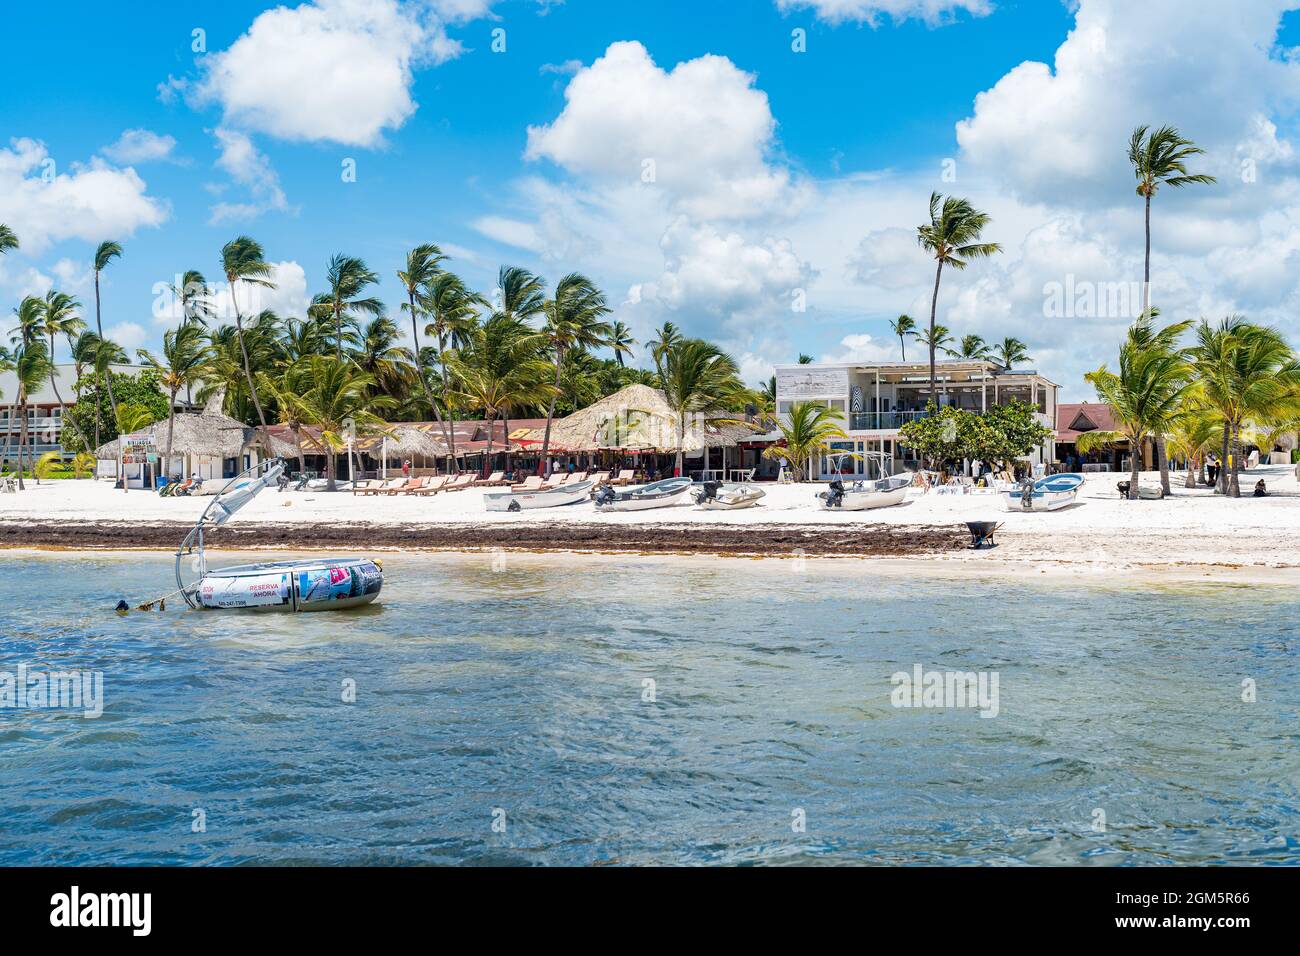 Dominican Republic Beach Market with Palm Trees and Water Sports Attractions. Stock Photo